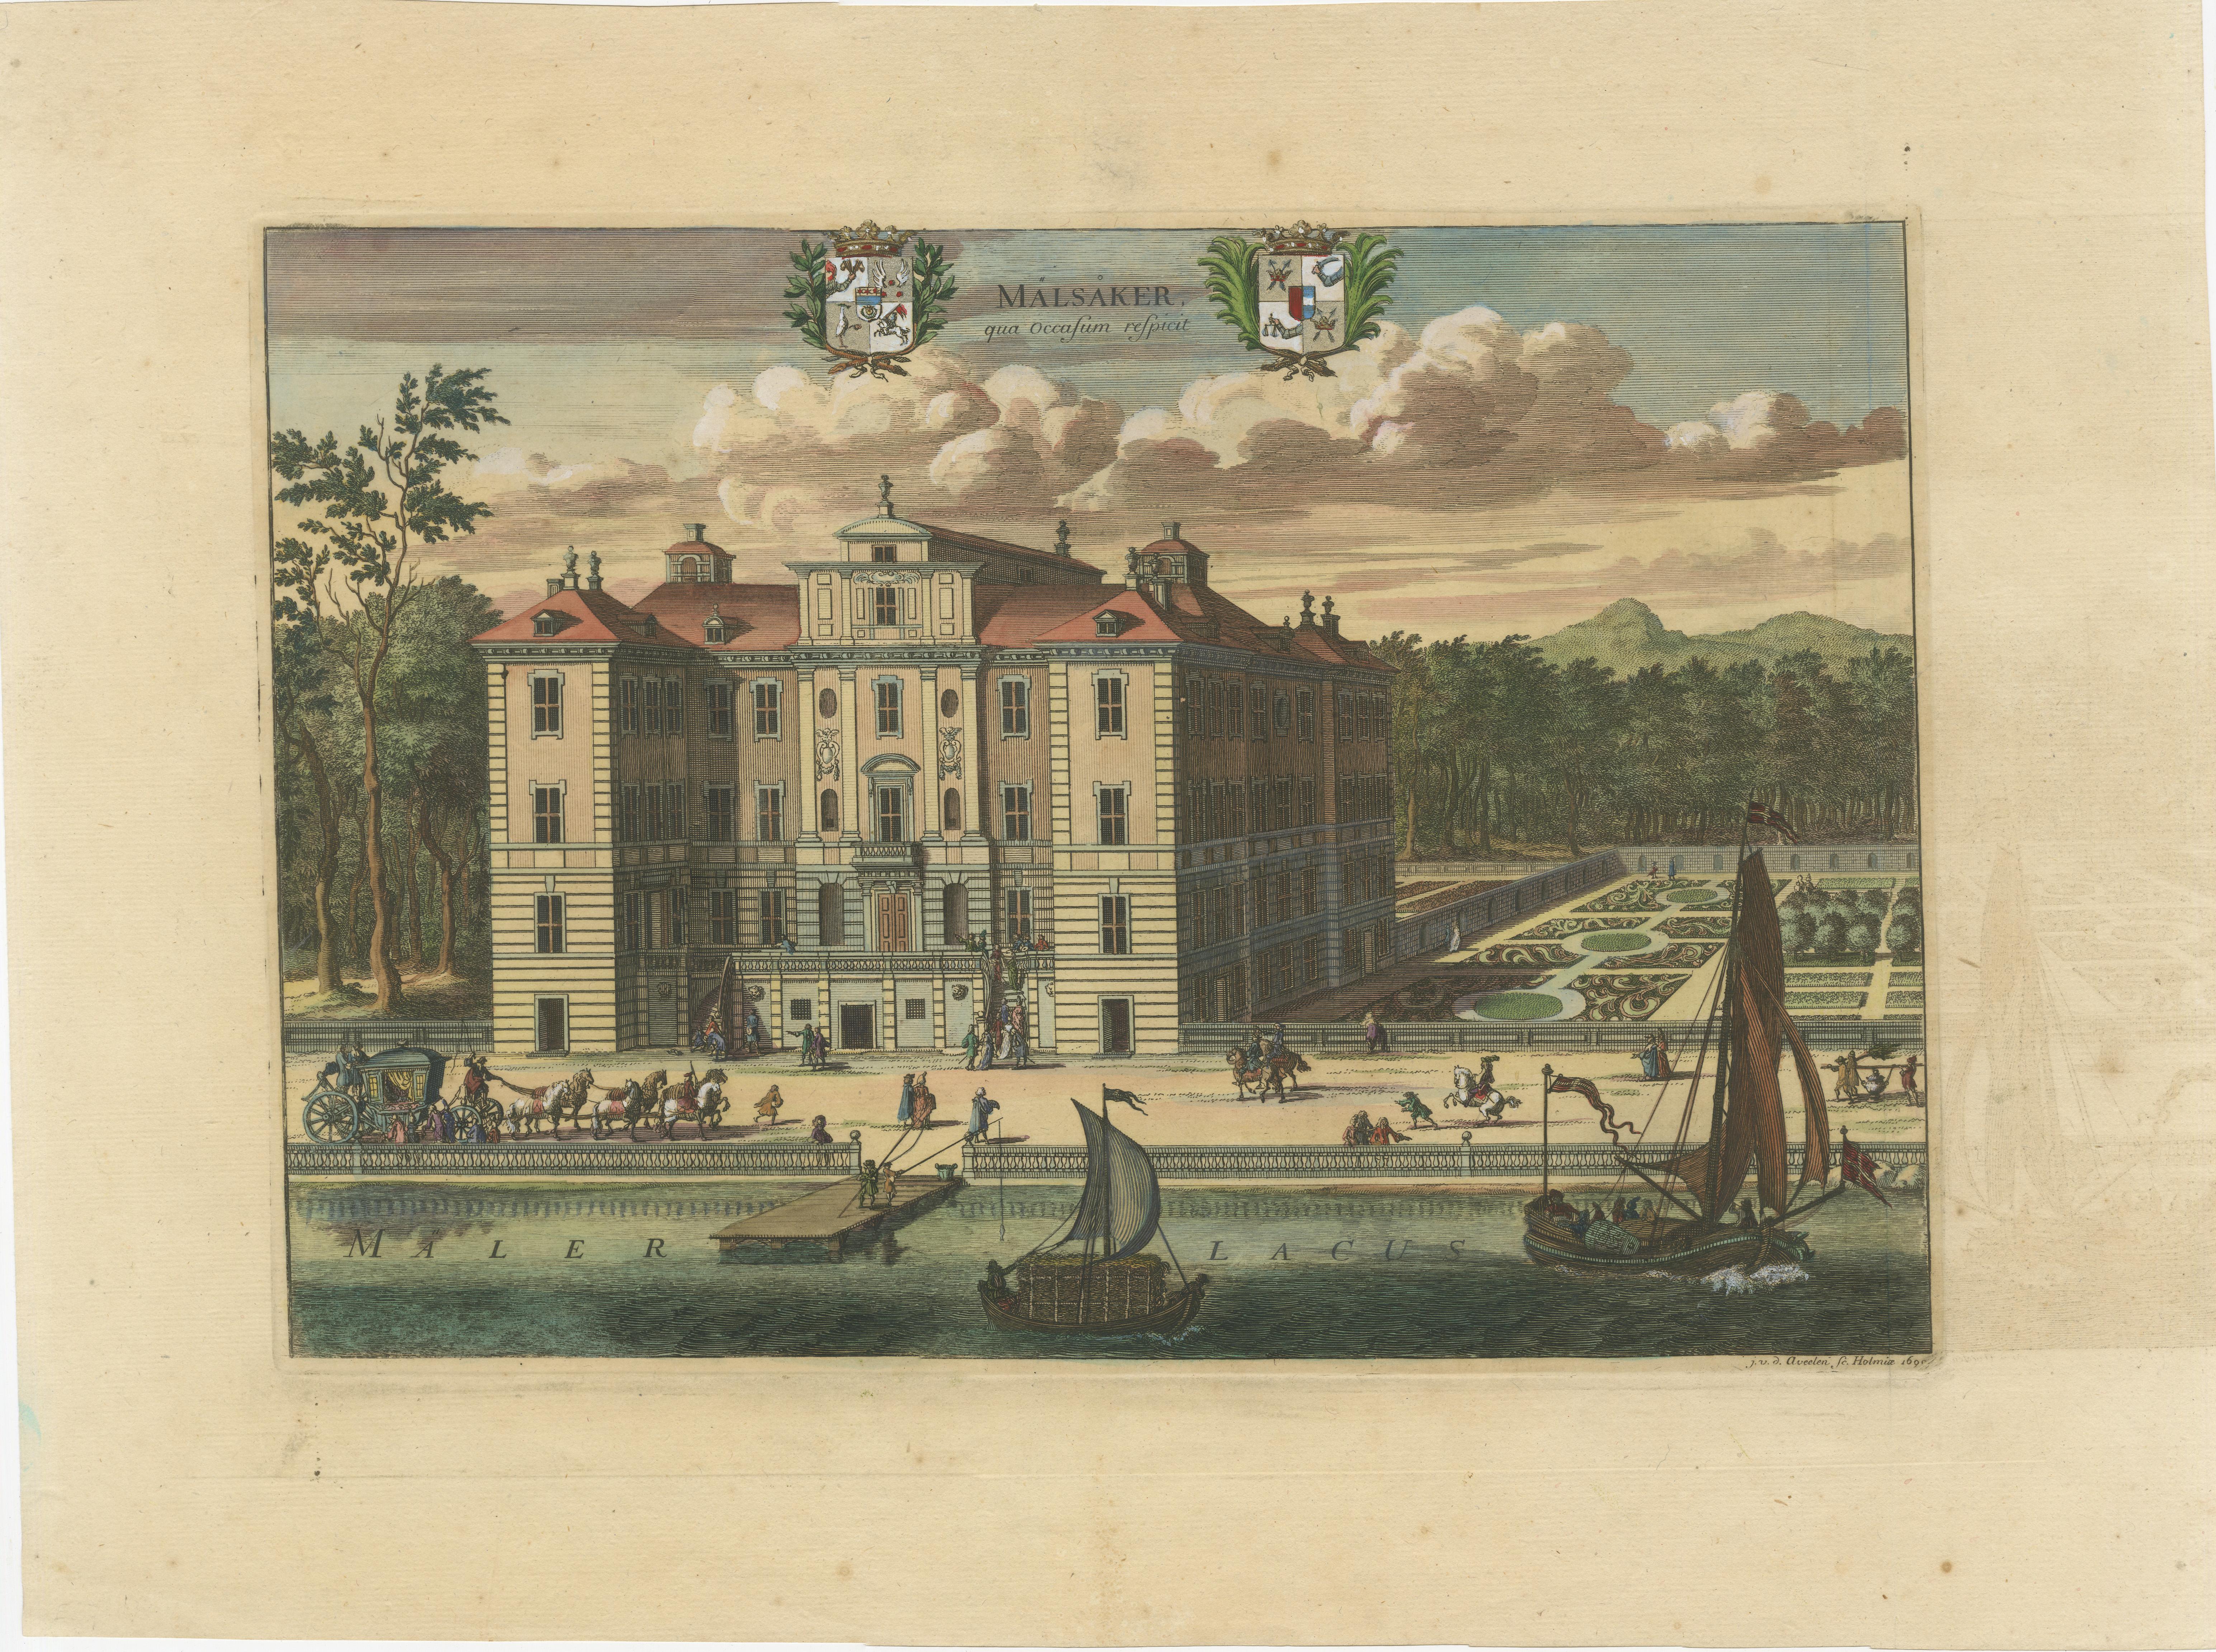 The image is a hand-colored engraving depicting the Mälsåker manor, located near Strängnäs in Södermanland, Sweden. Above the image, two coats of arms are displayed, likely indicating the noble families associated with the manor. The engraving is a